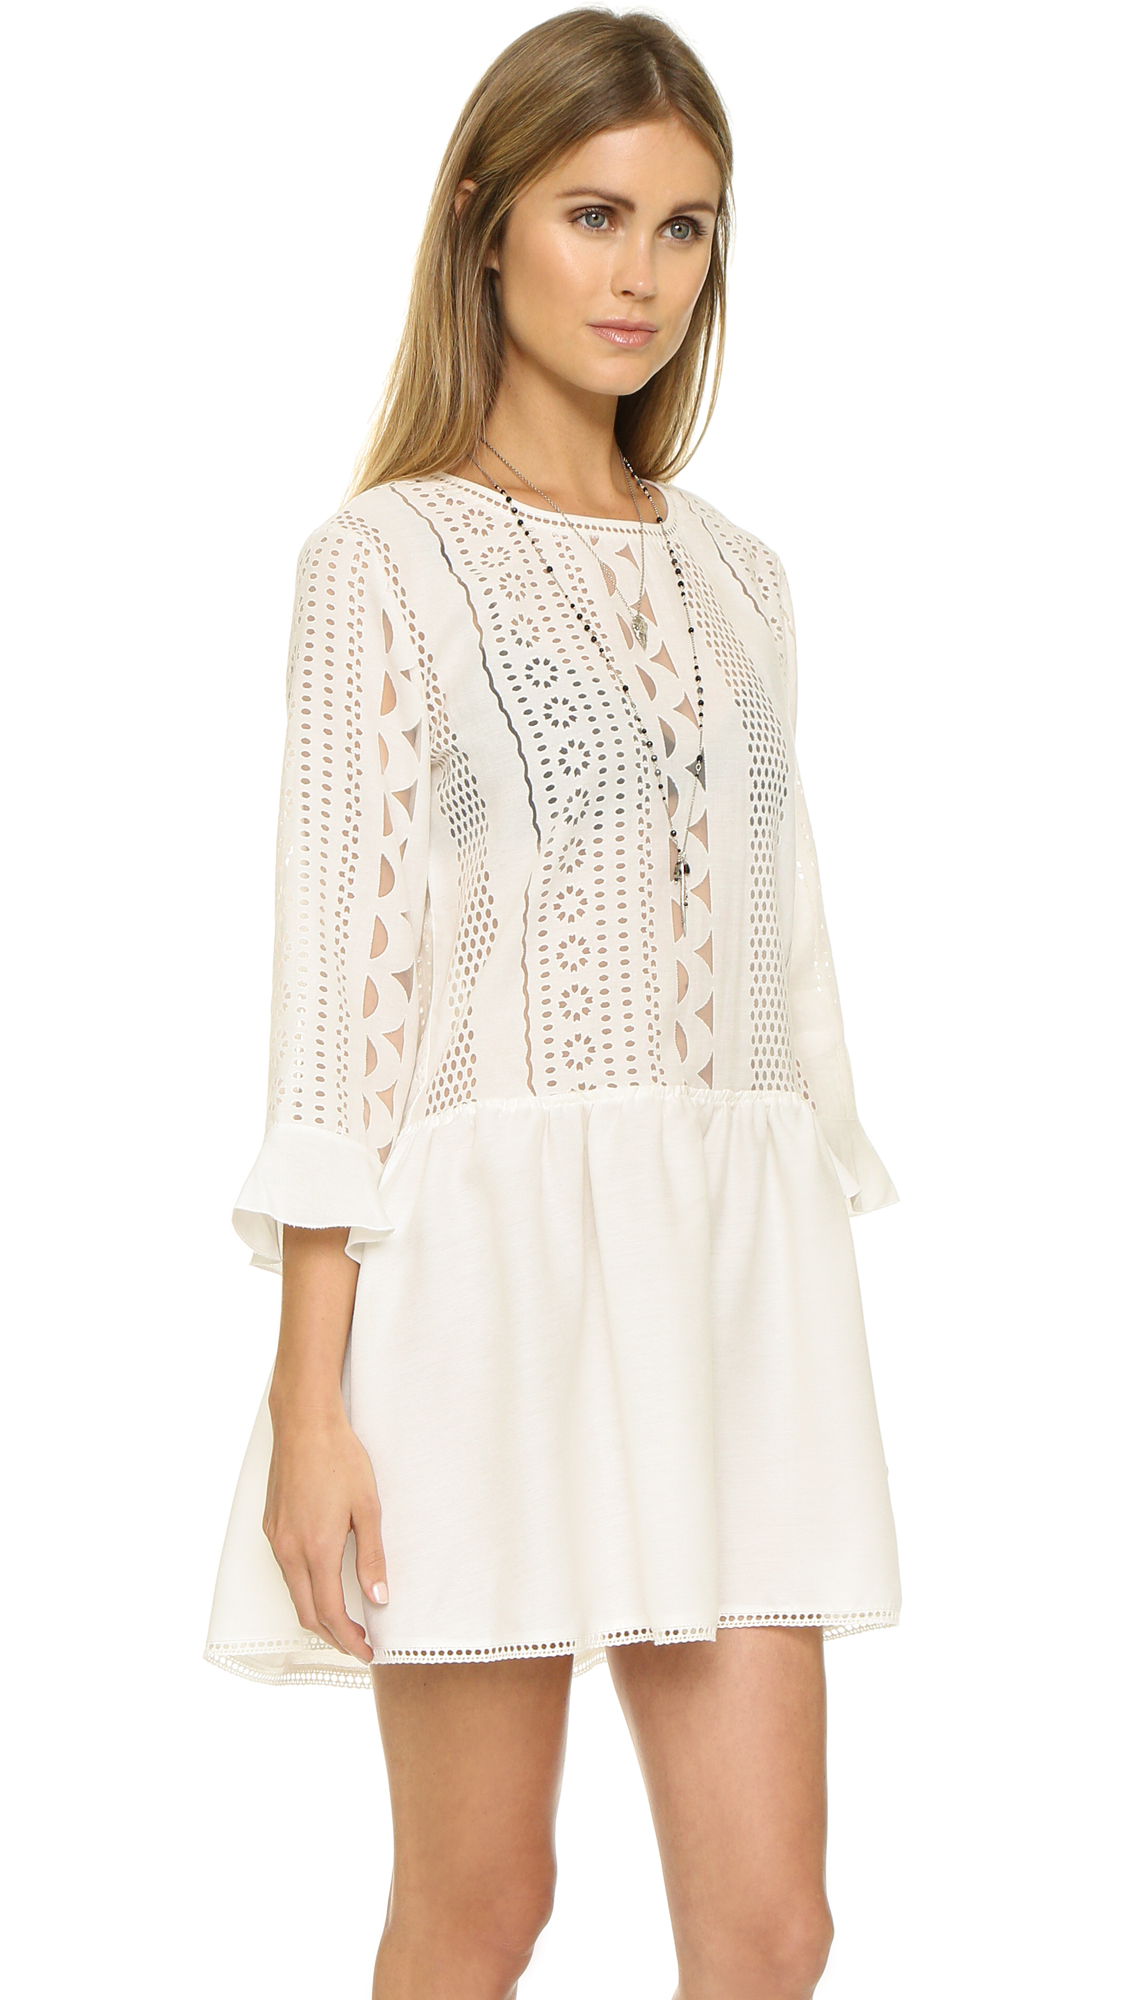 Lyst - Anine Bing Lace Dress - White in White